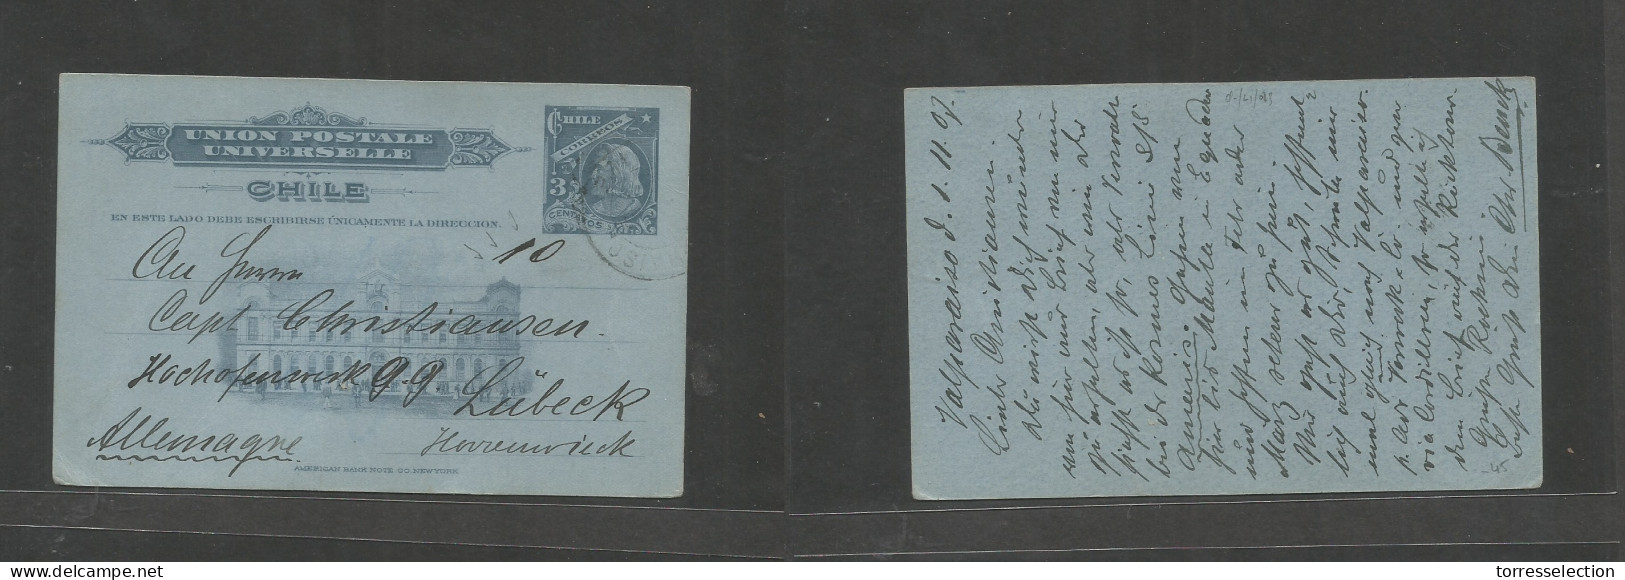 CHILE - Stationery. 1907 (1 Feb) Valp - Germany, Lubeck. 3c Color Blue On Bluish Stat Card With MANUSCRIPT "10" Of Diffe - Cile